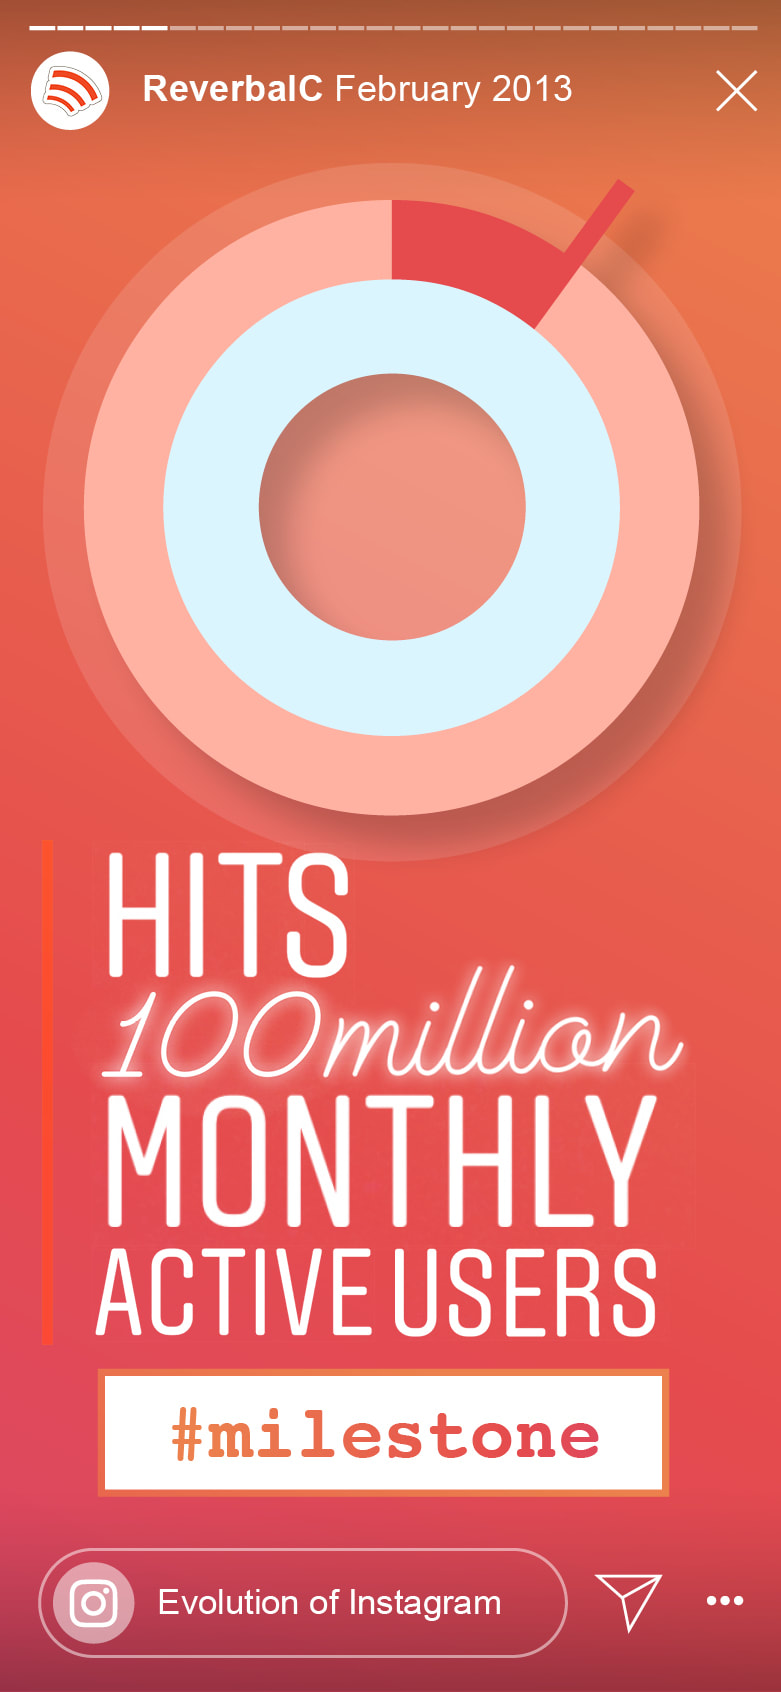 When did Instagram hit 100 million users?